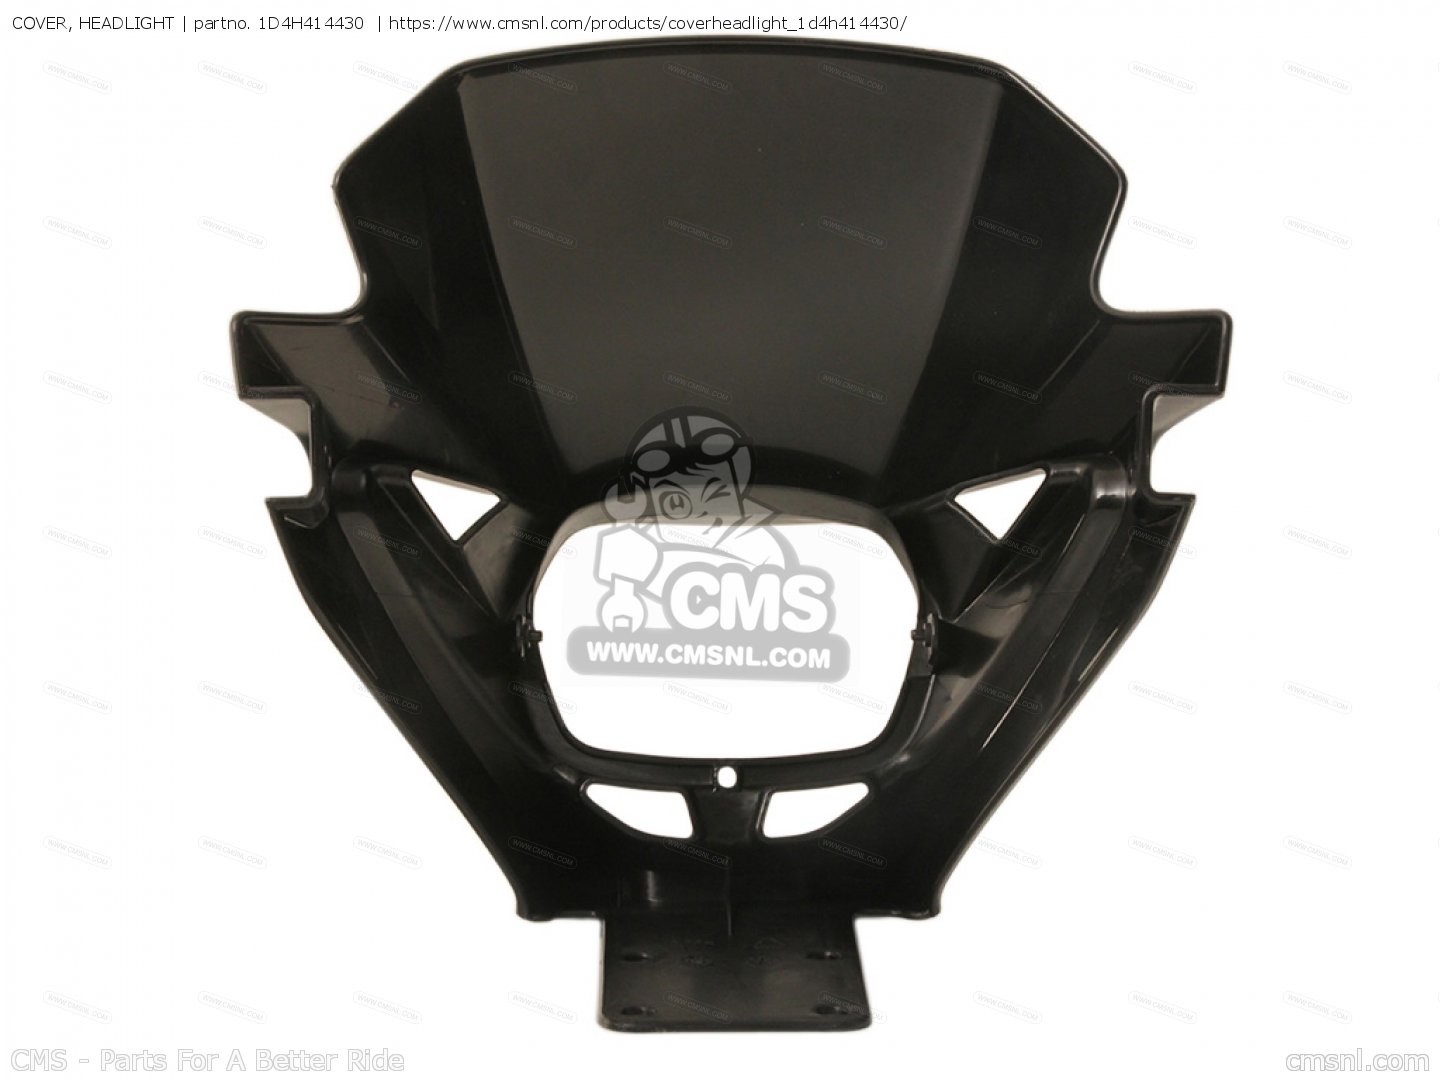 COVER, HEADLIGHT for DT50R 2007 13C1 SWEDEN 1F13C-300F1 - order at ...